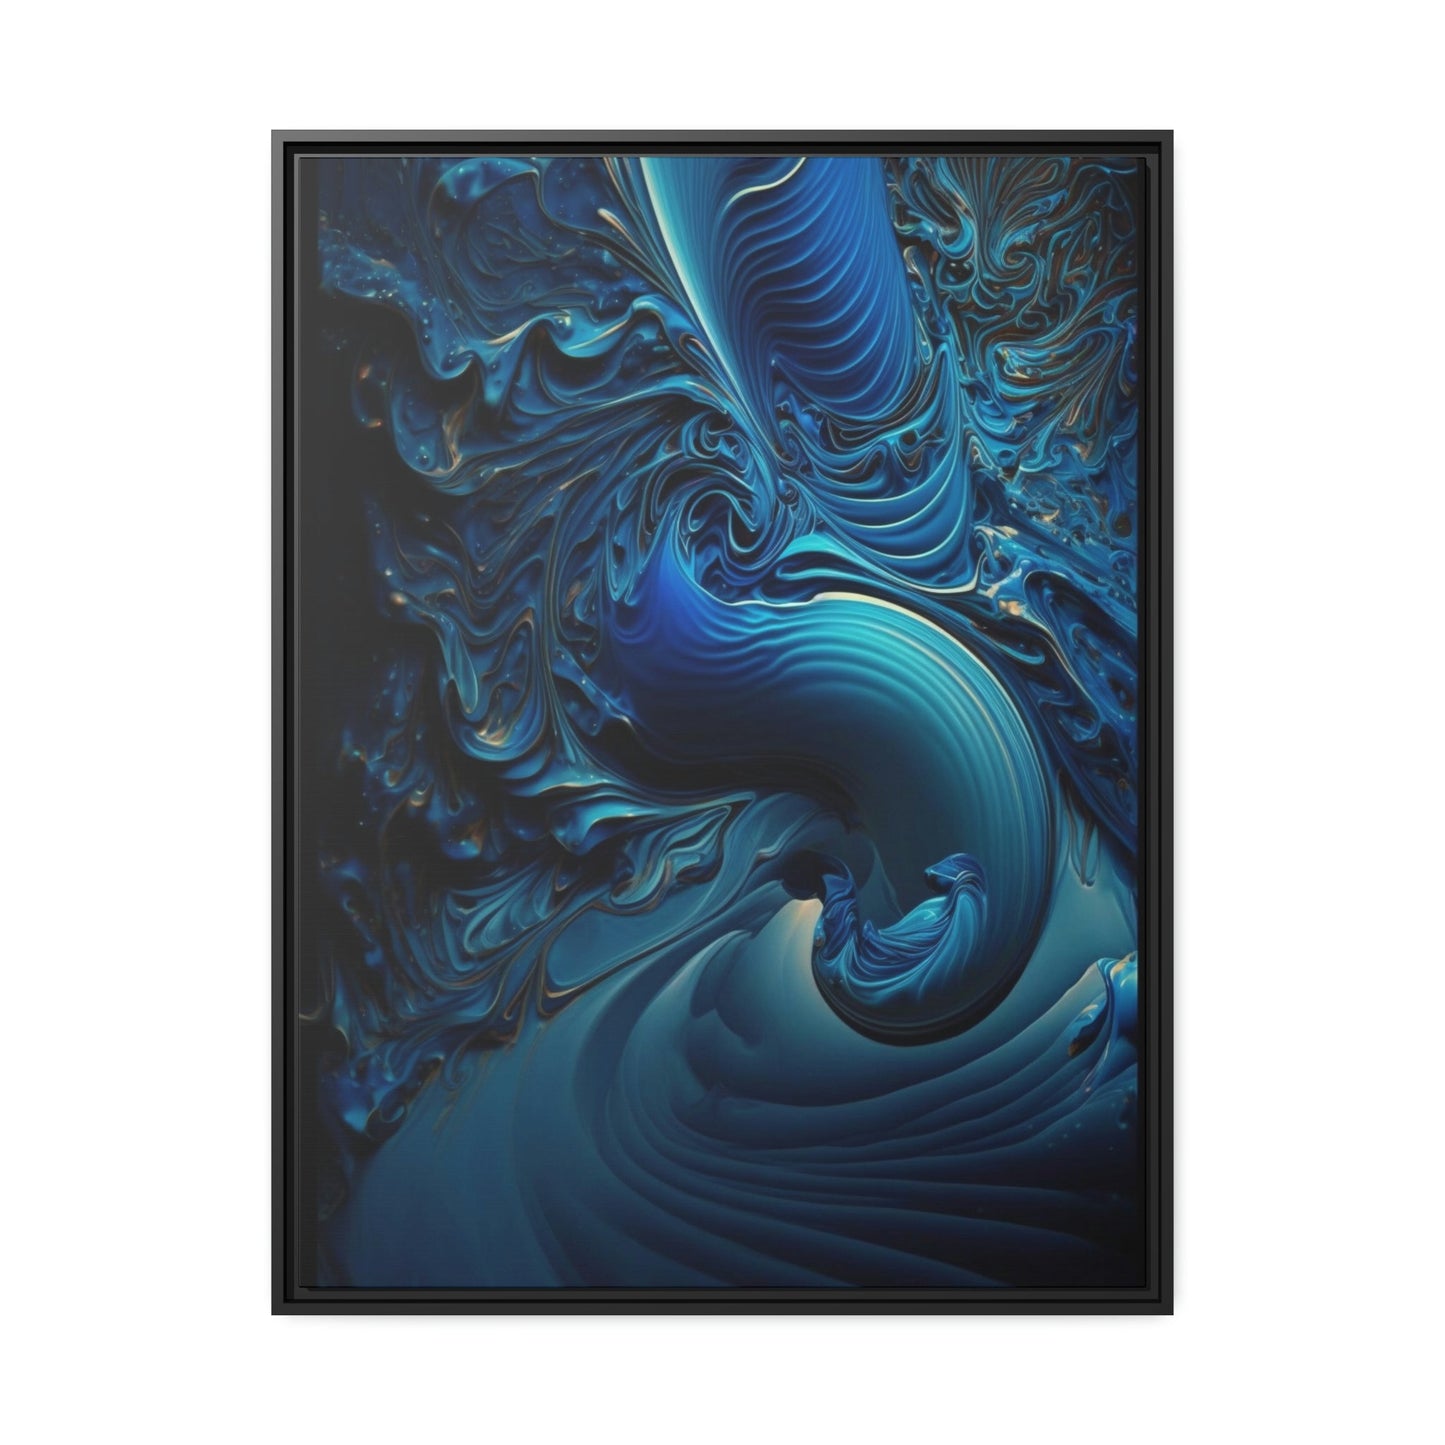 Into the Blue: Gorgeous Blue Themed Canvas Art for Your Home or Office